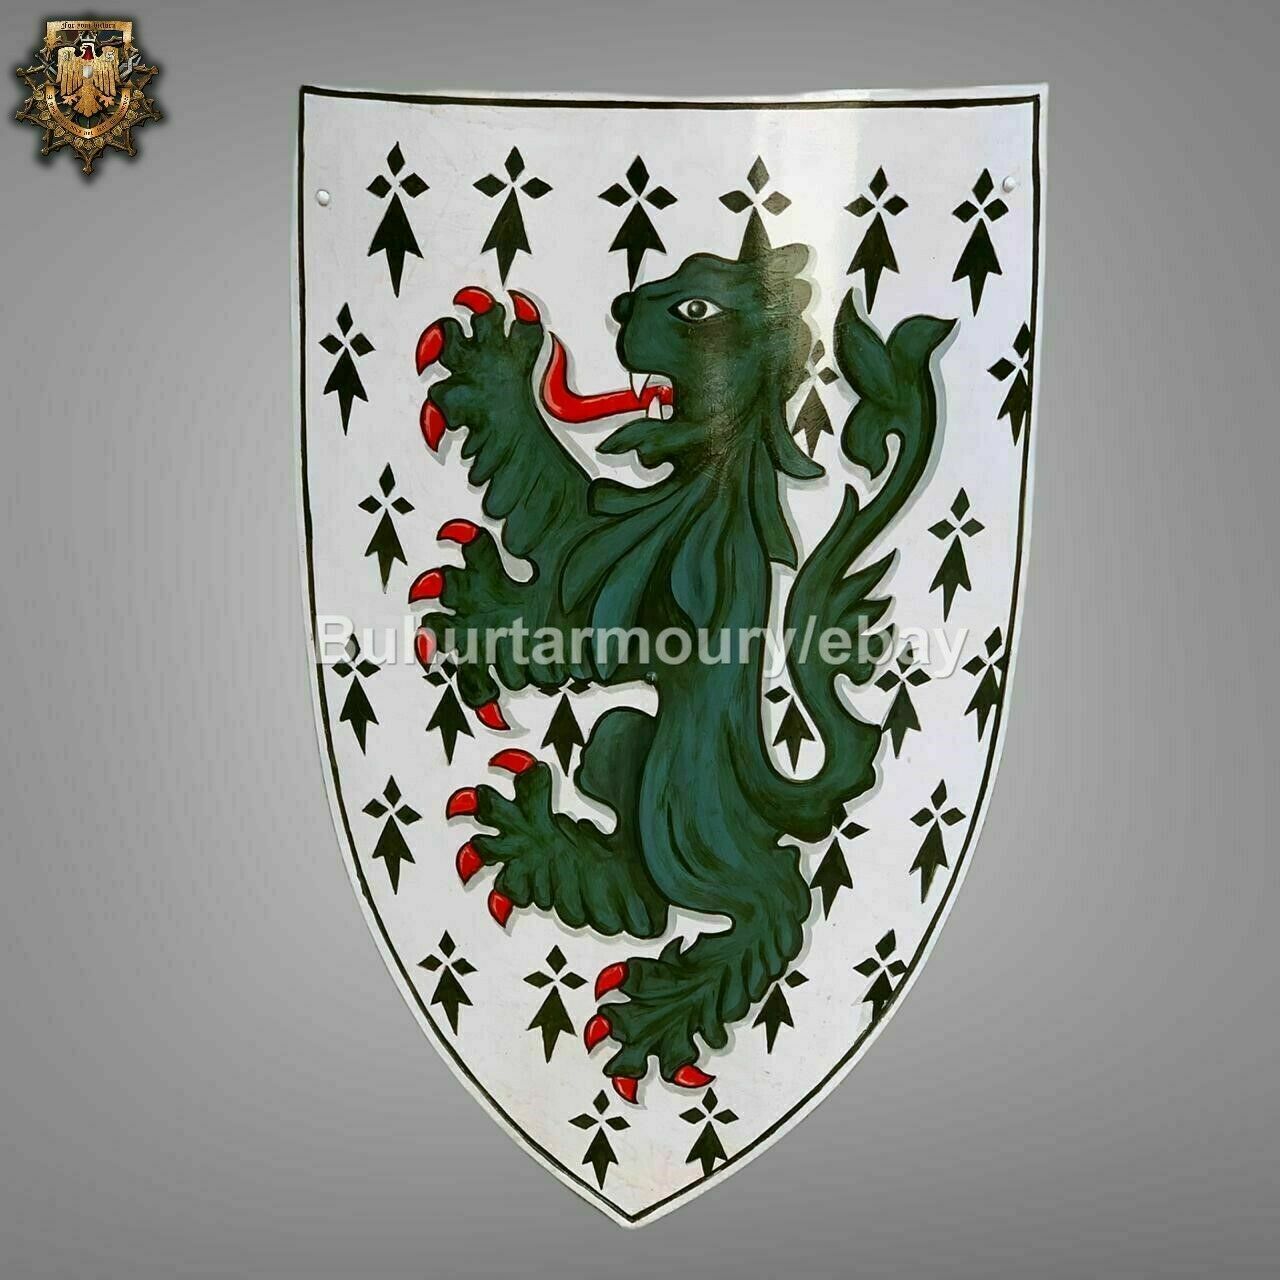 28 Inch Medieval The Family Coat Of Arms Shield Heater Shield Lion Shield SE75